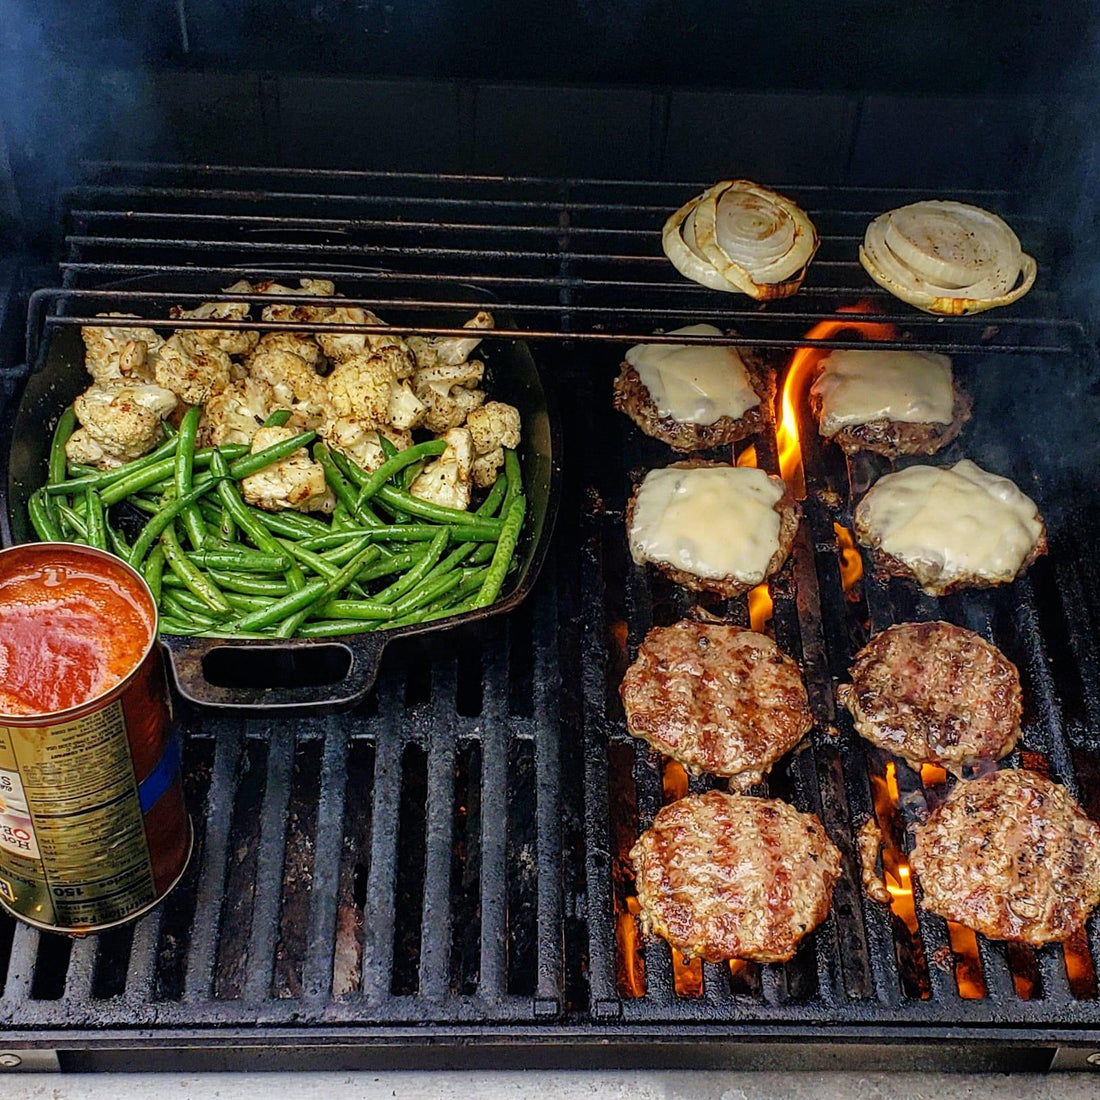 Lit up the grill for tonight’s dinner even though it was raining because.... burgers!